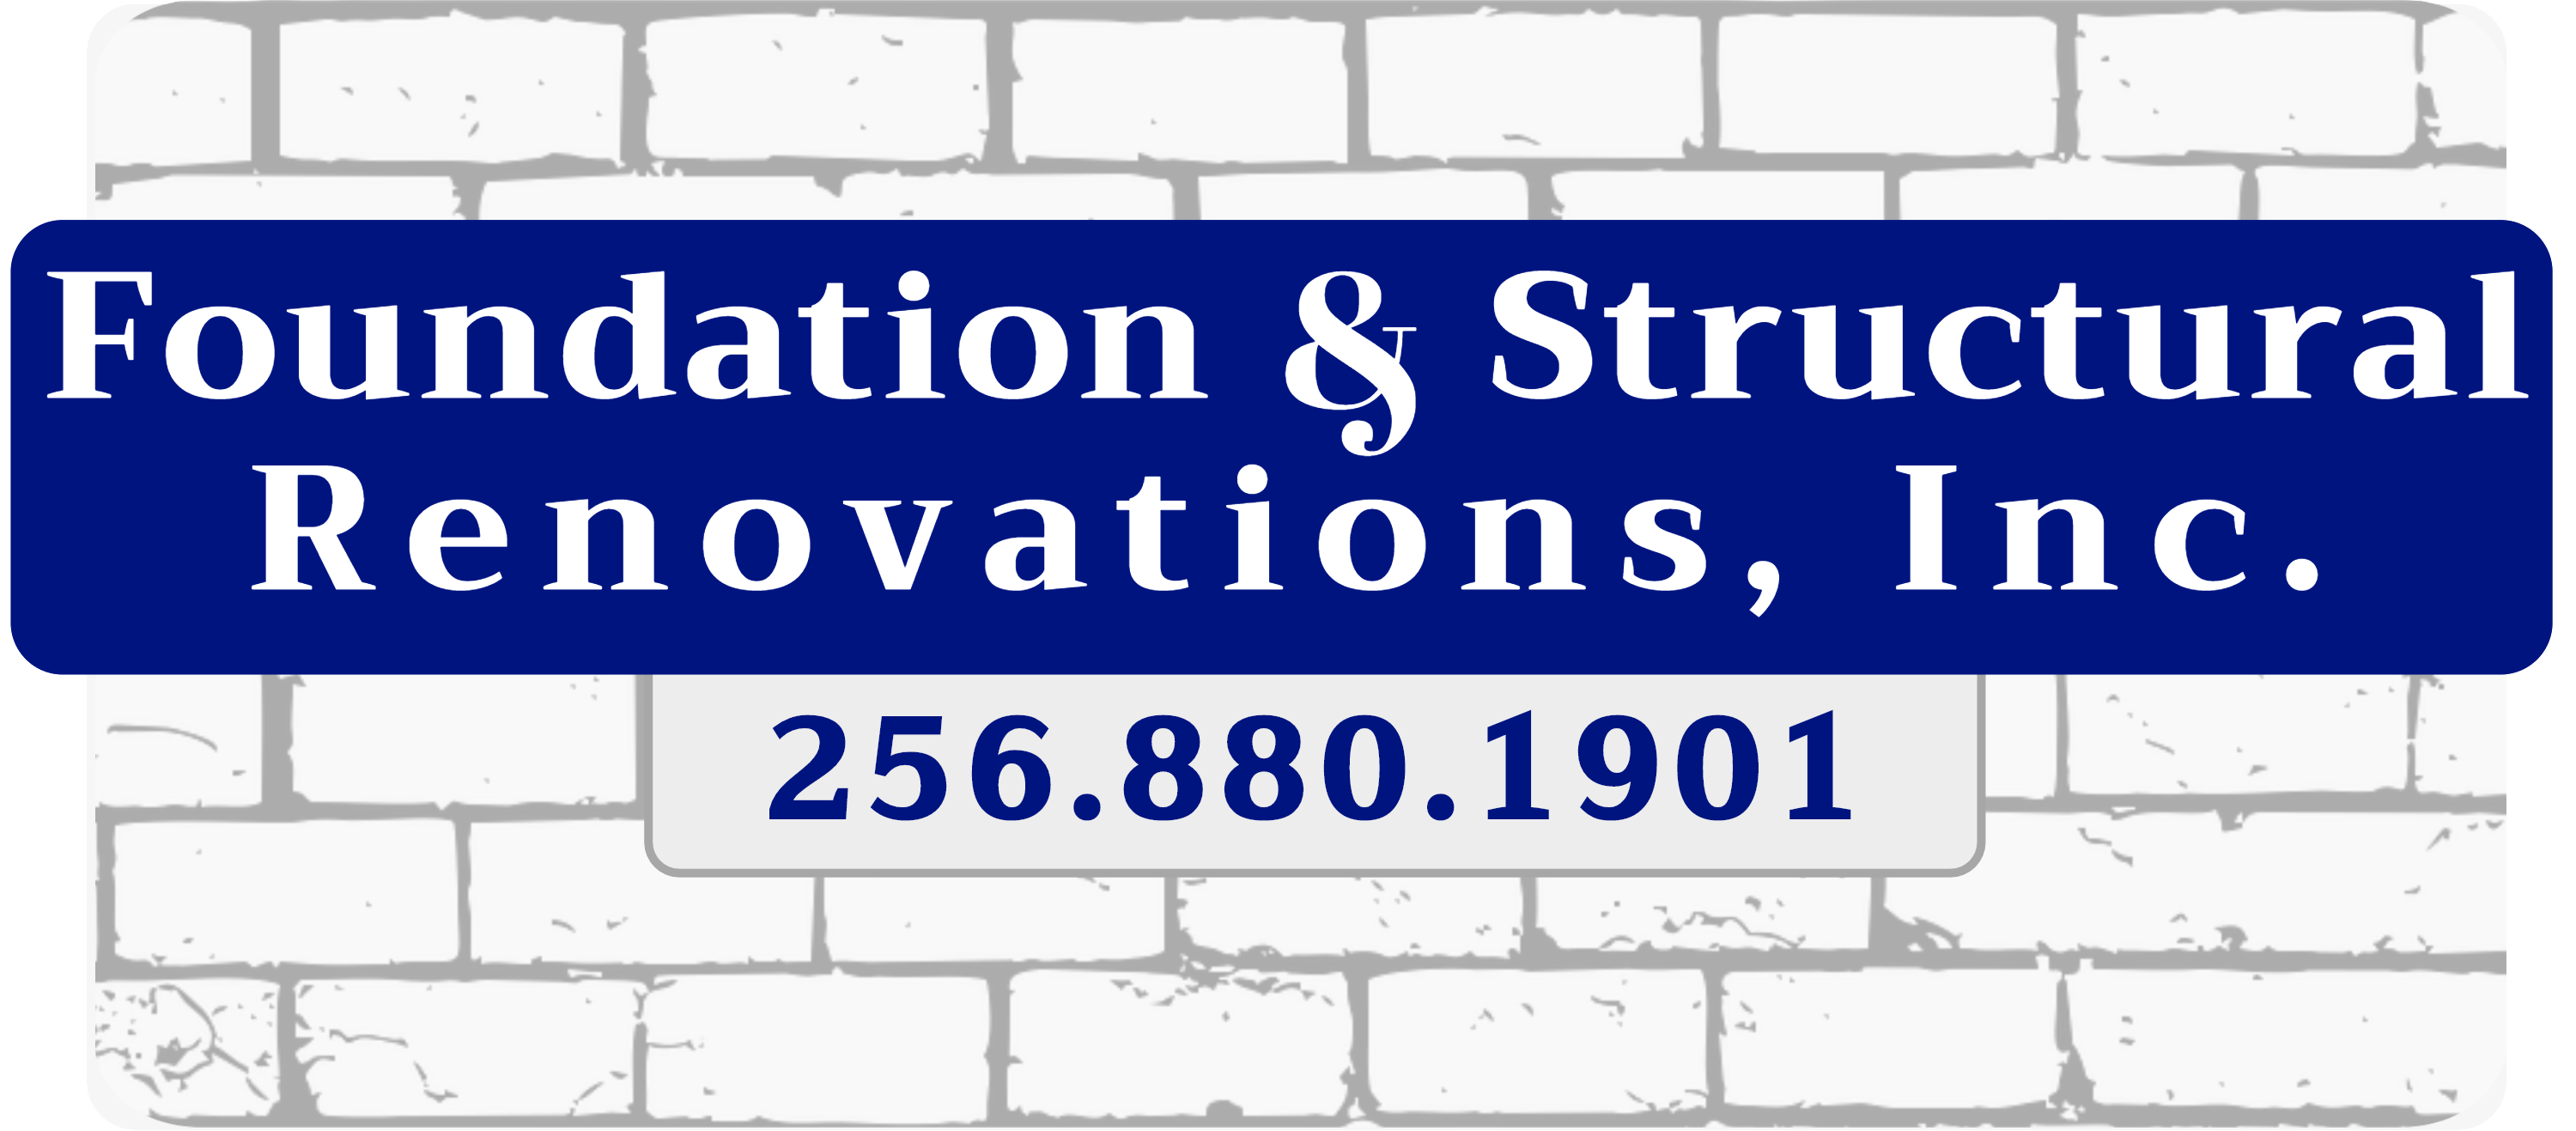 Foundation & Structural Renovations